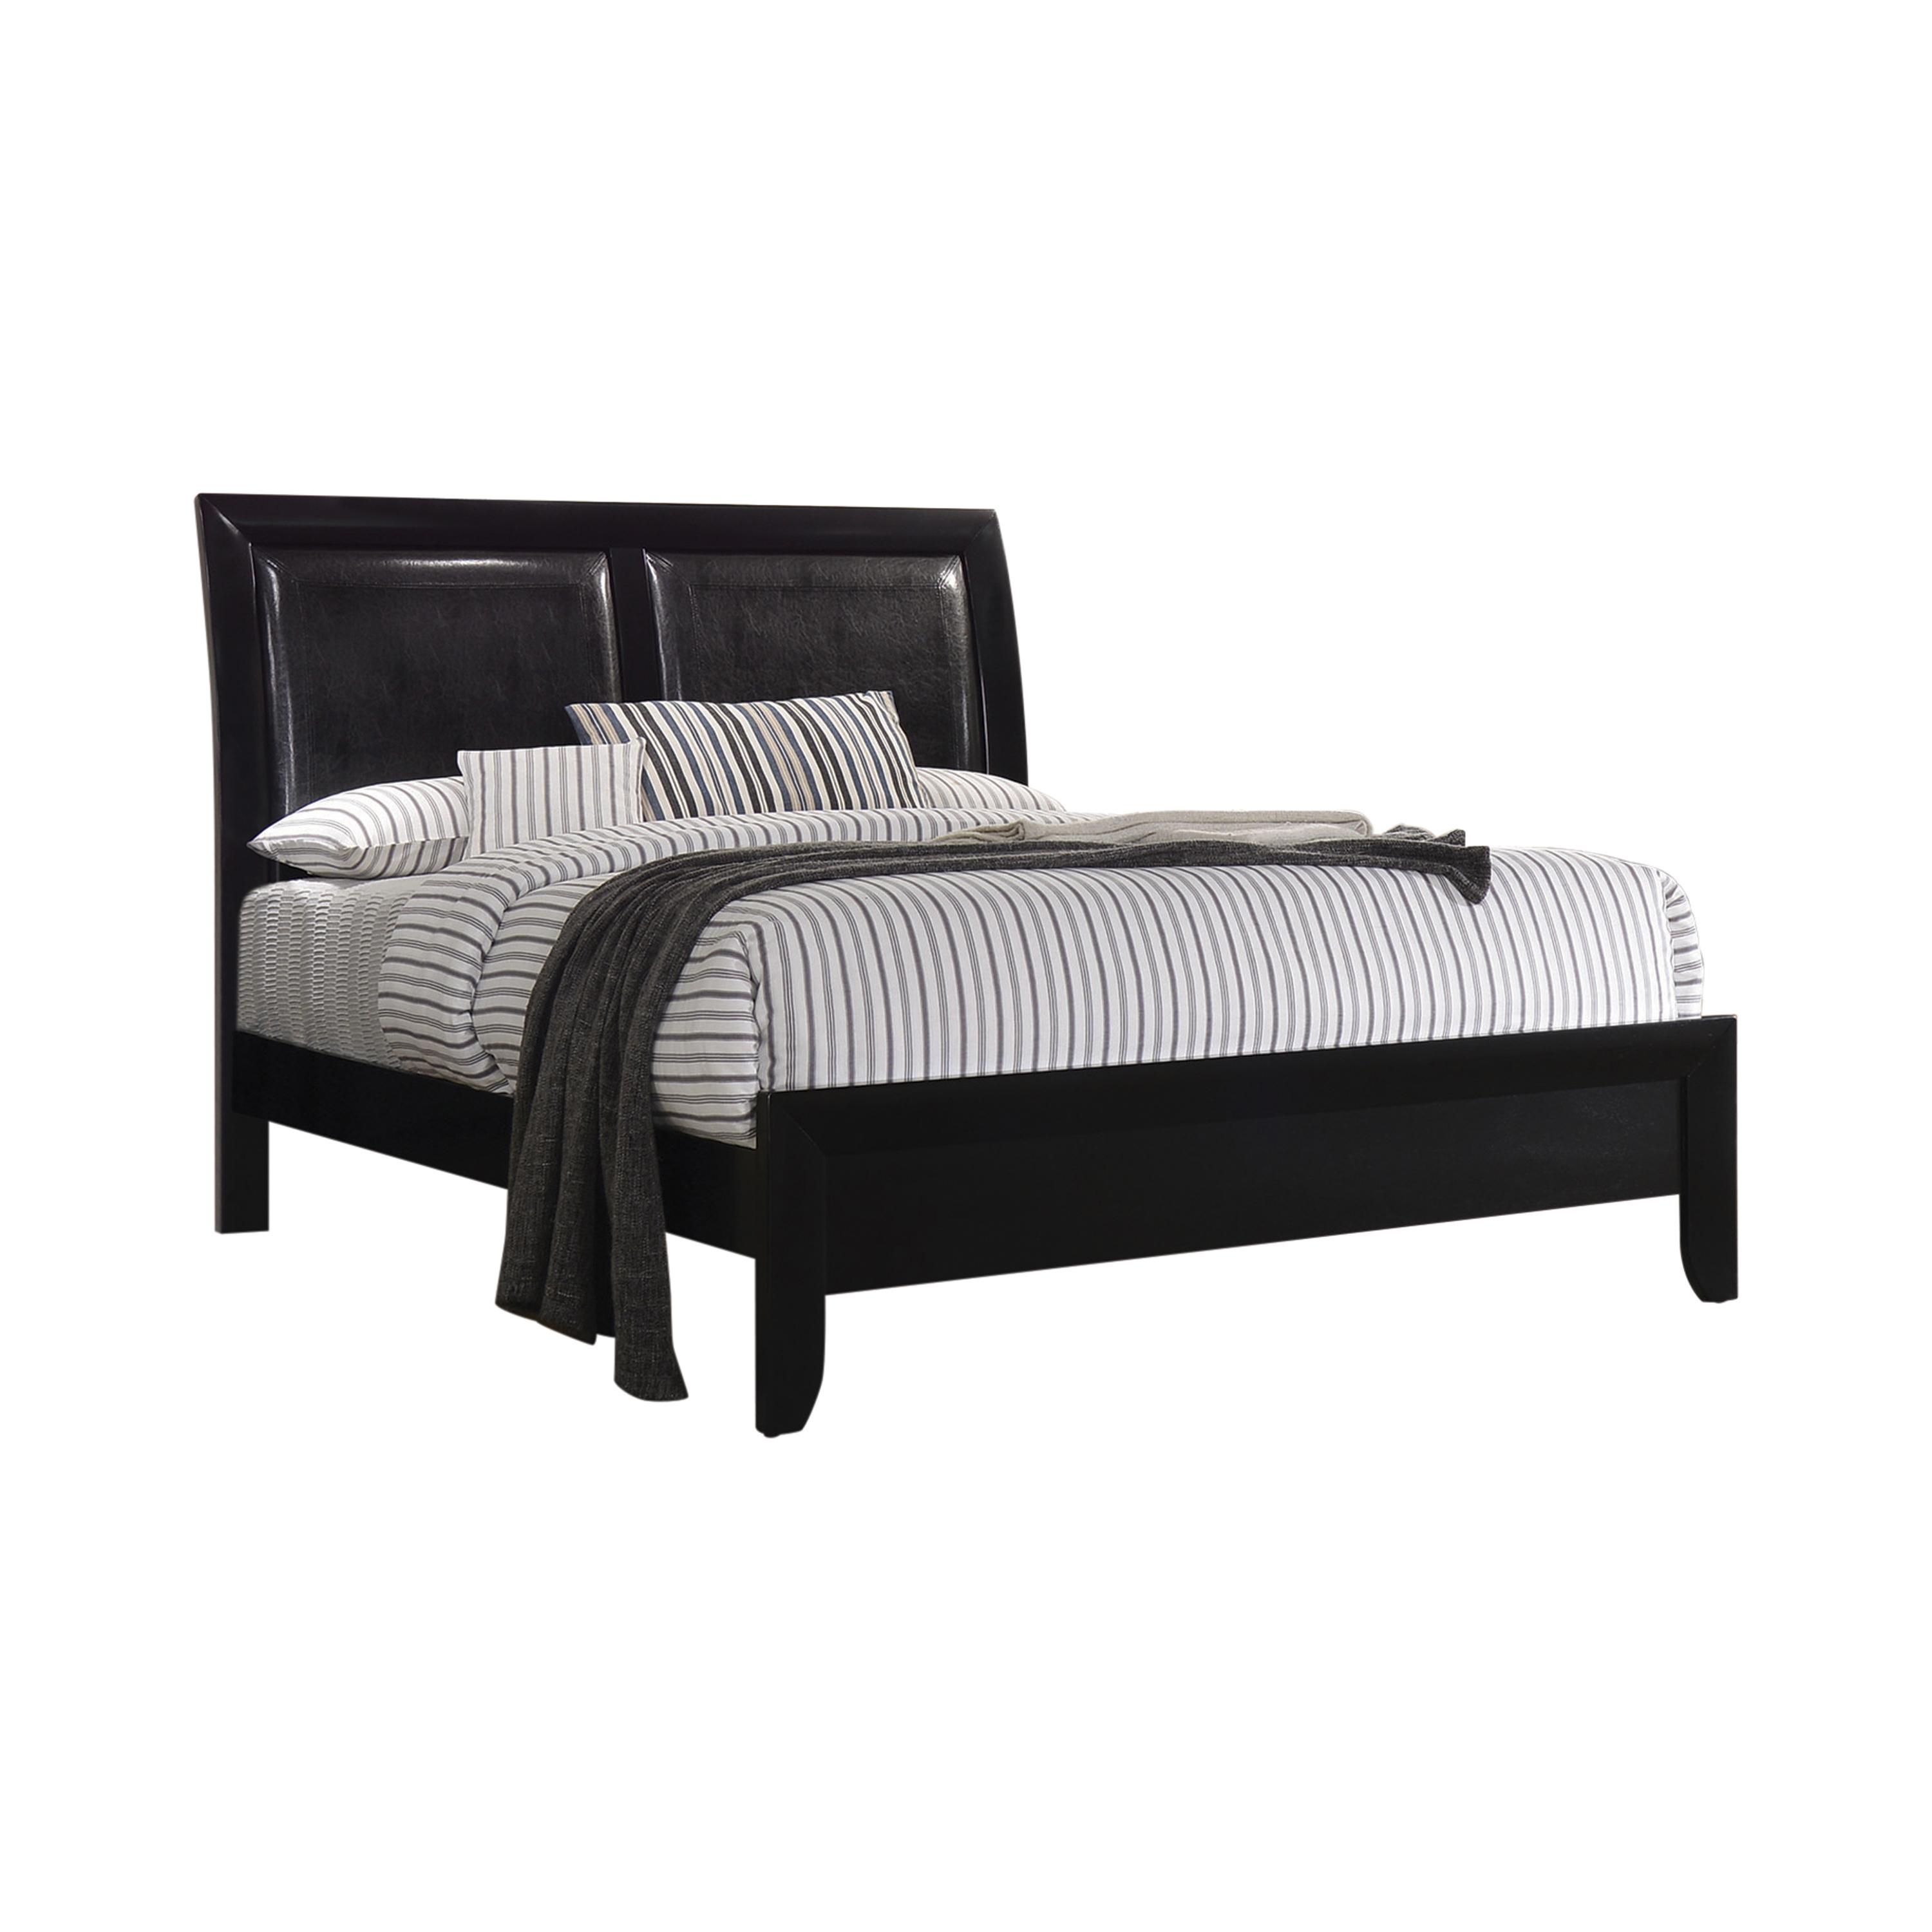 Transitional Bed 200701KW Briana 200701KW in Black Leatherette